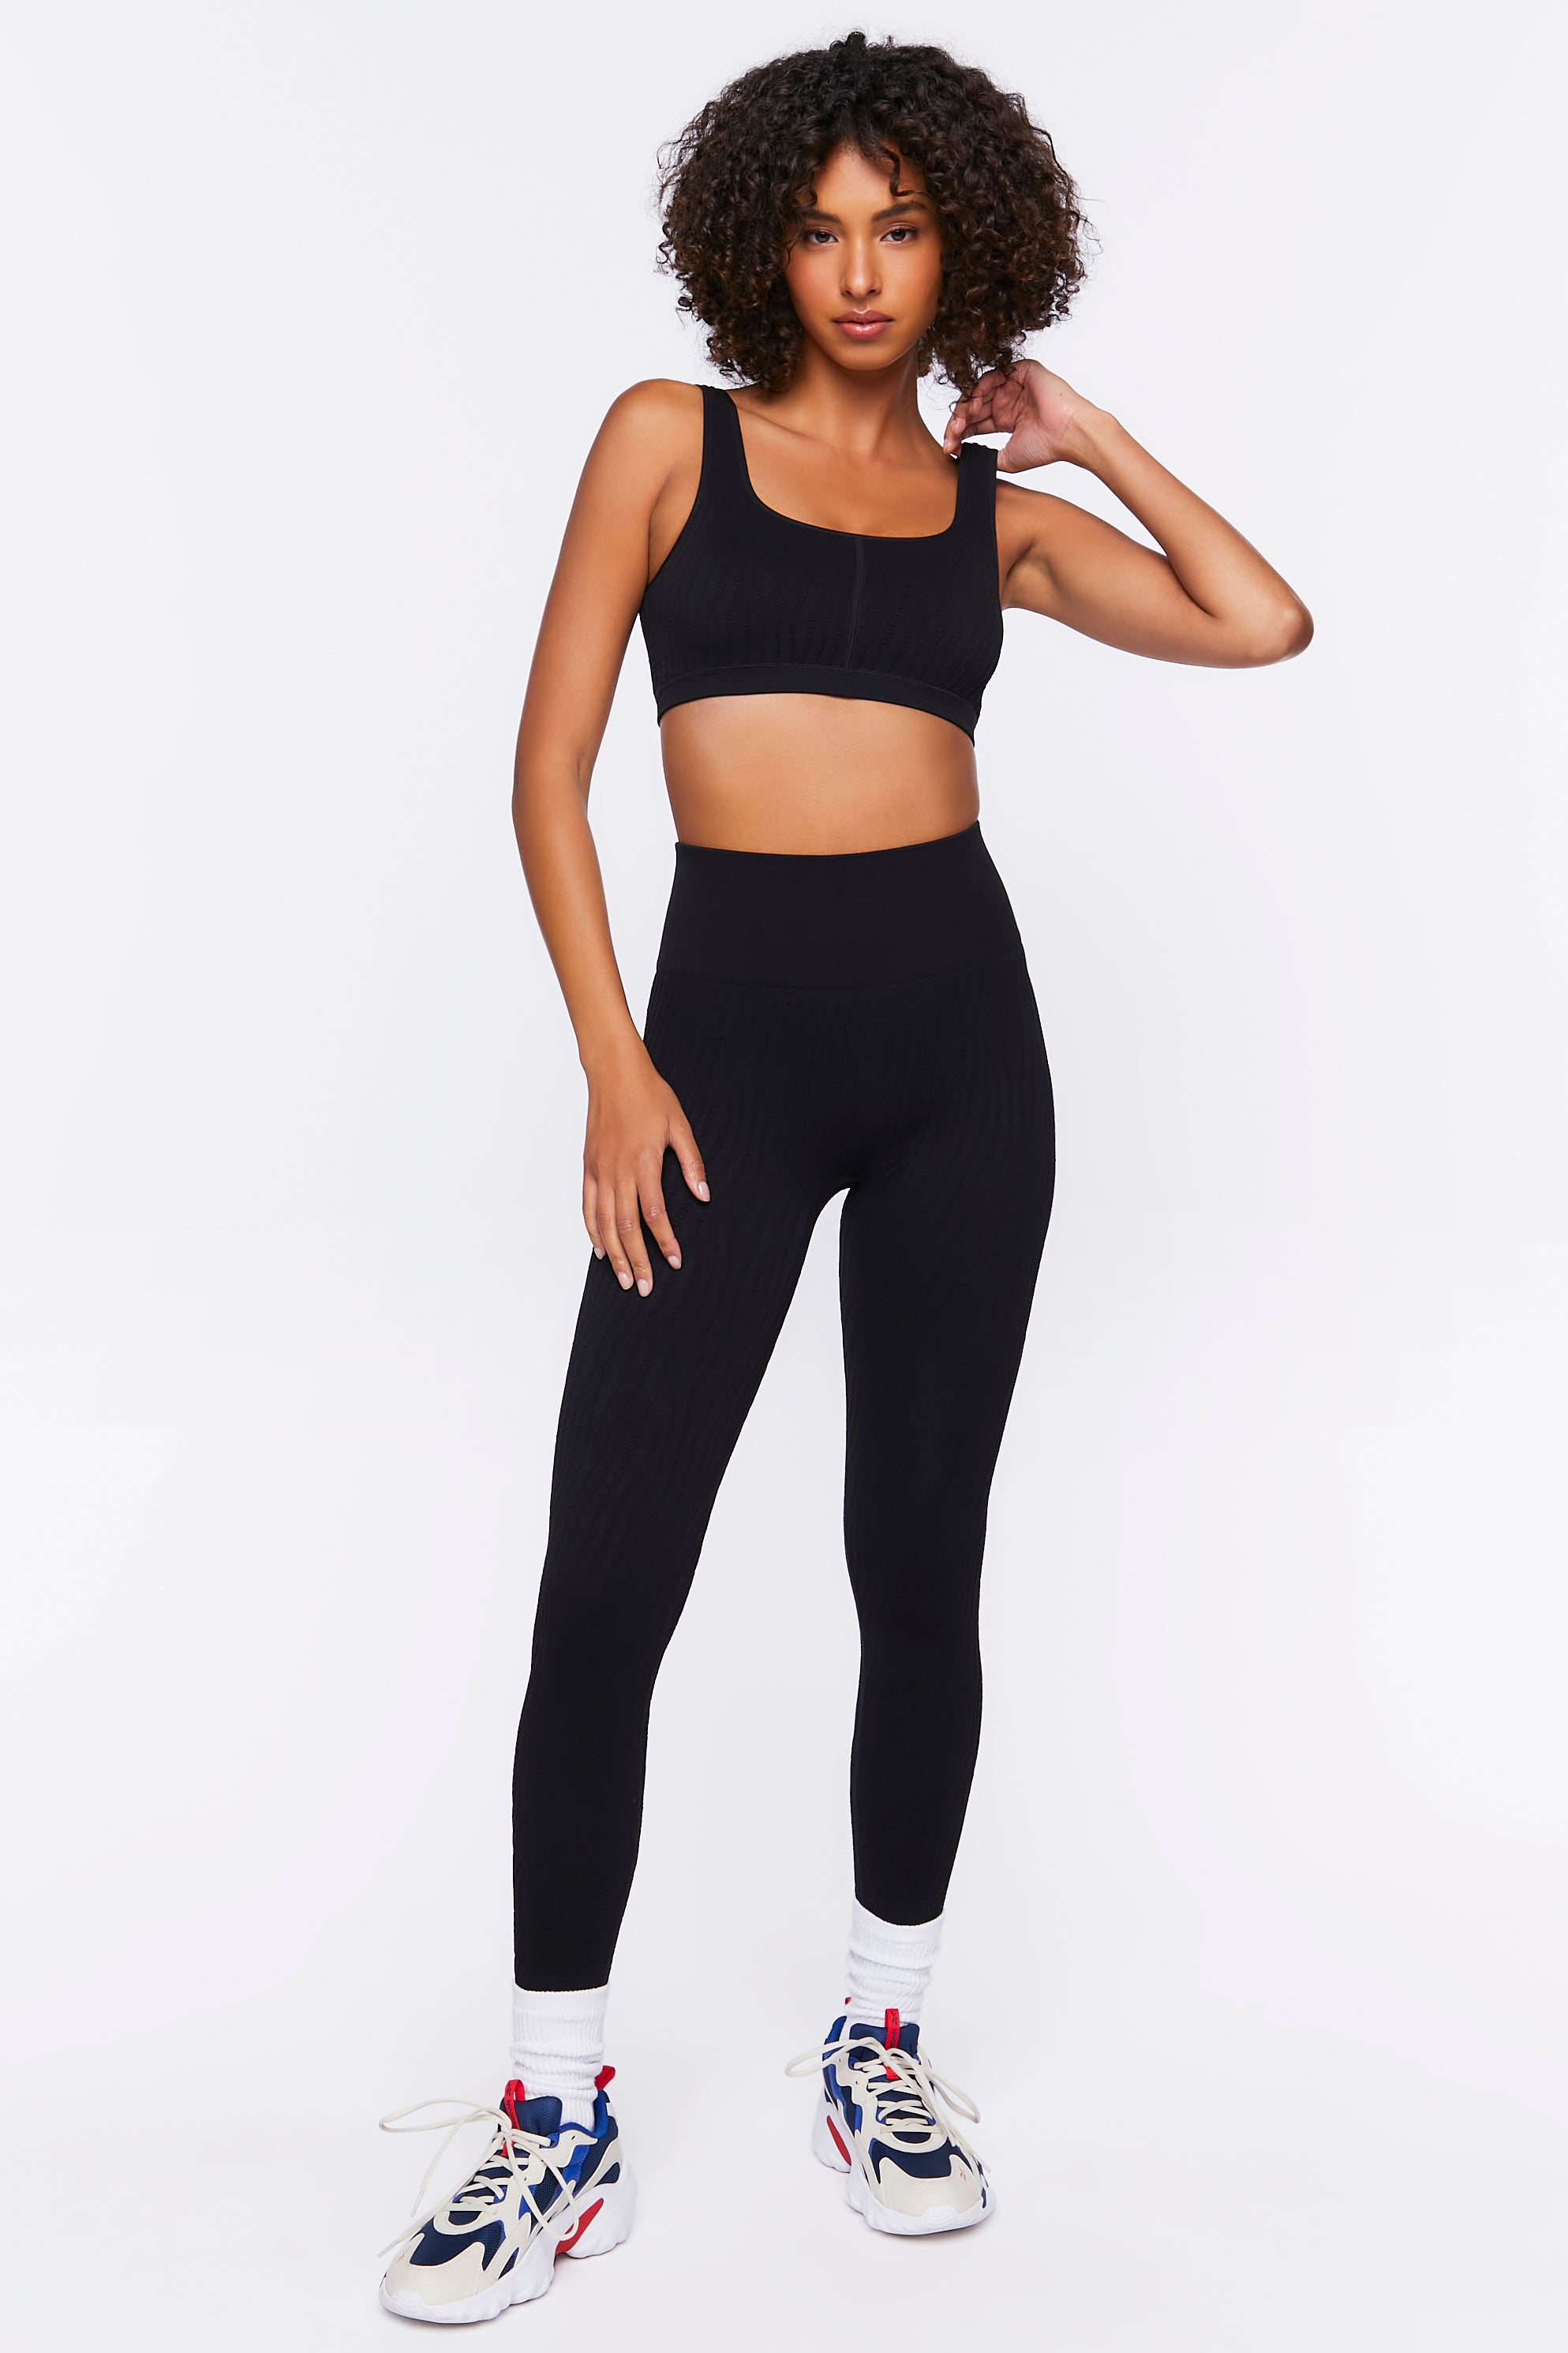 Shop For Active Seamless Textured Leggings